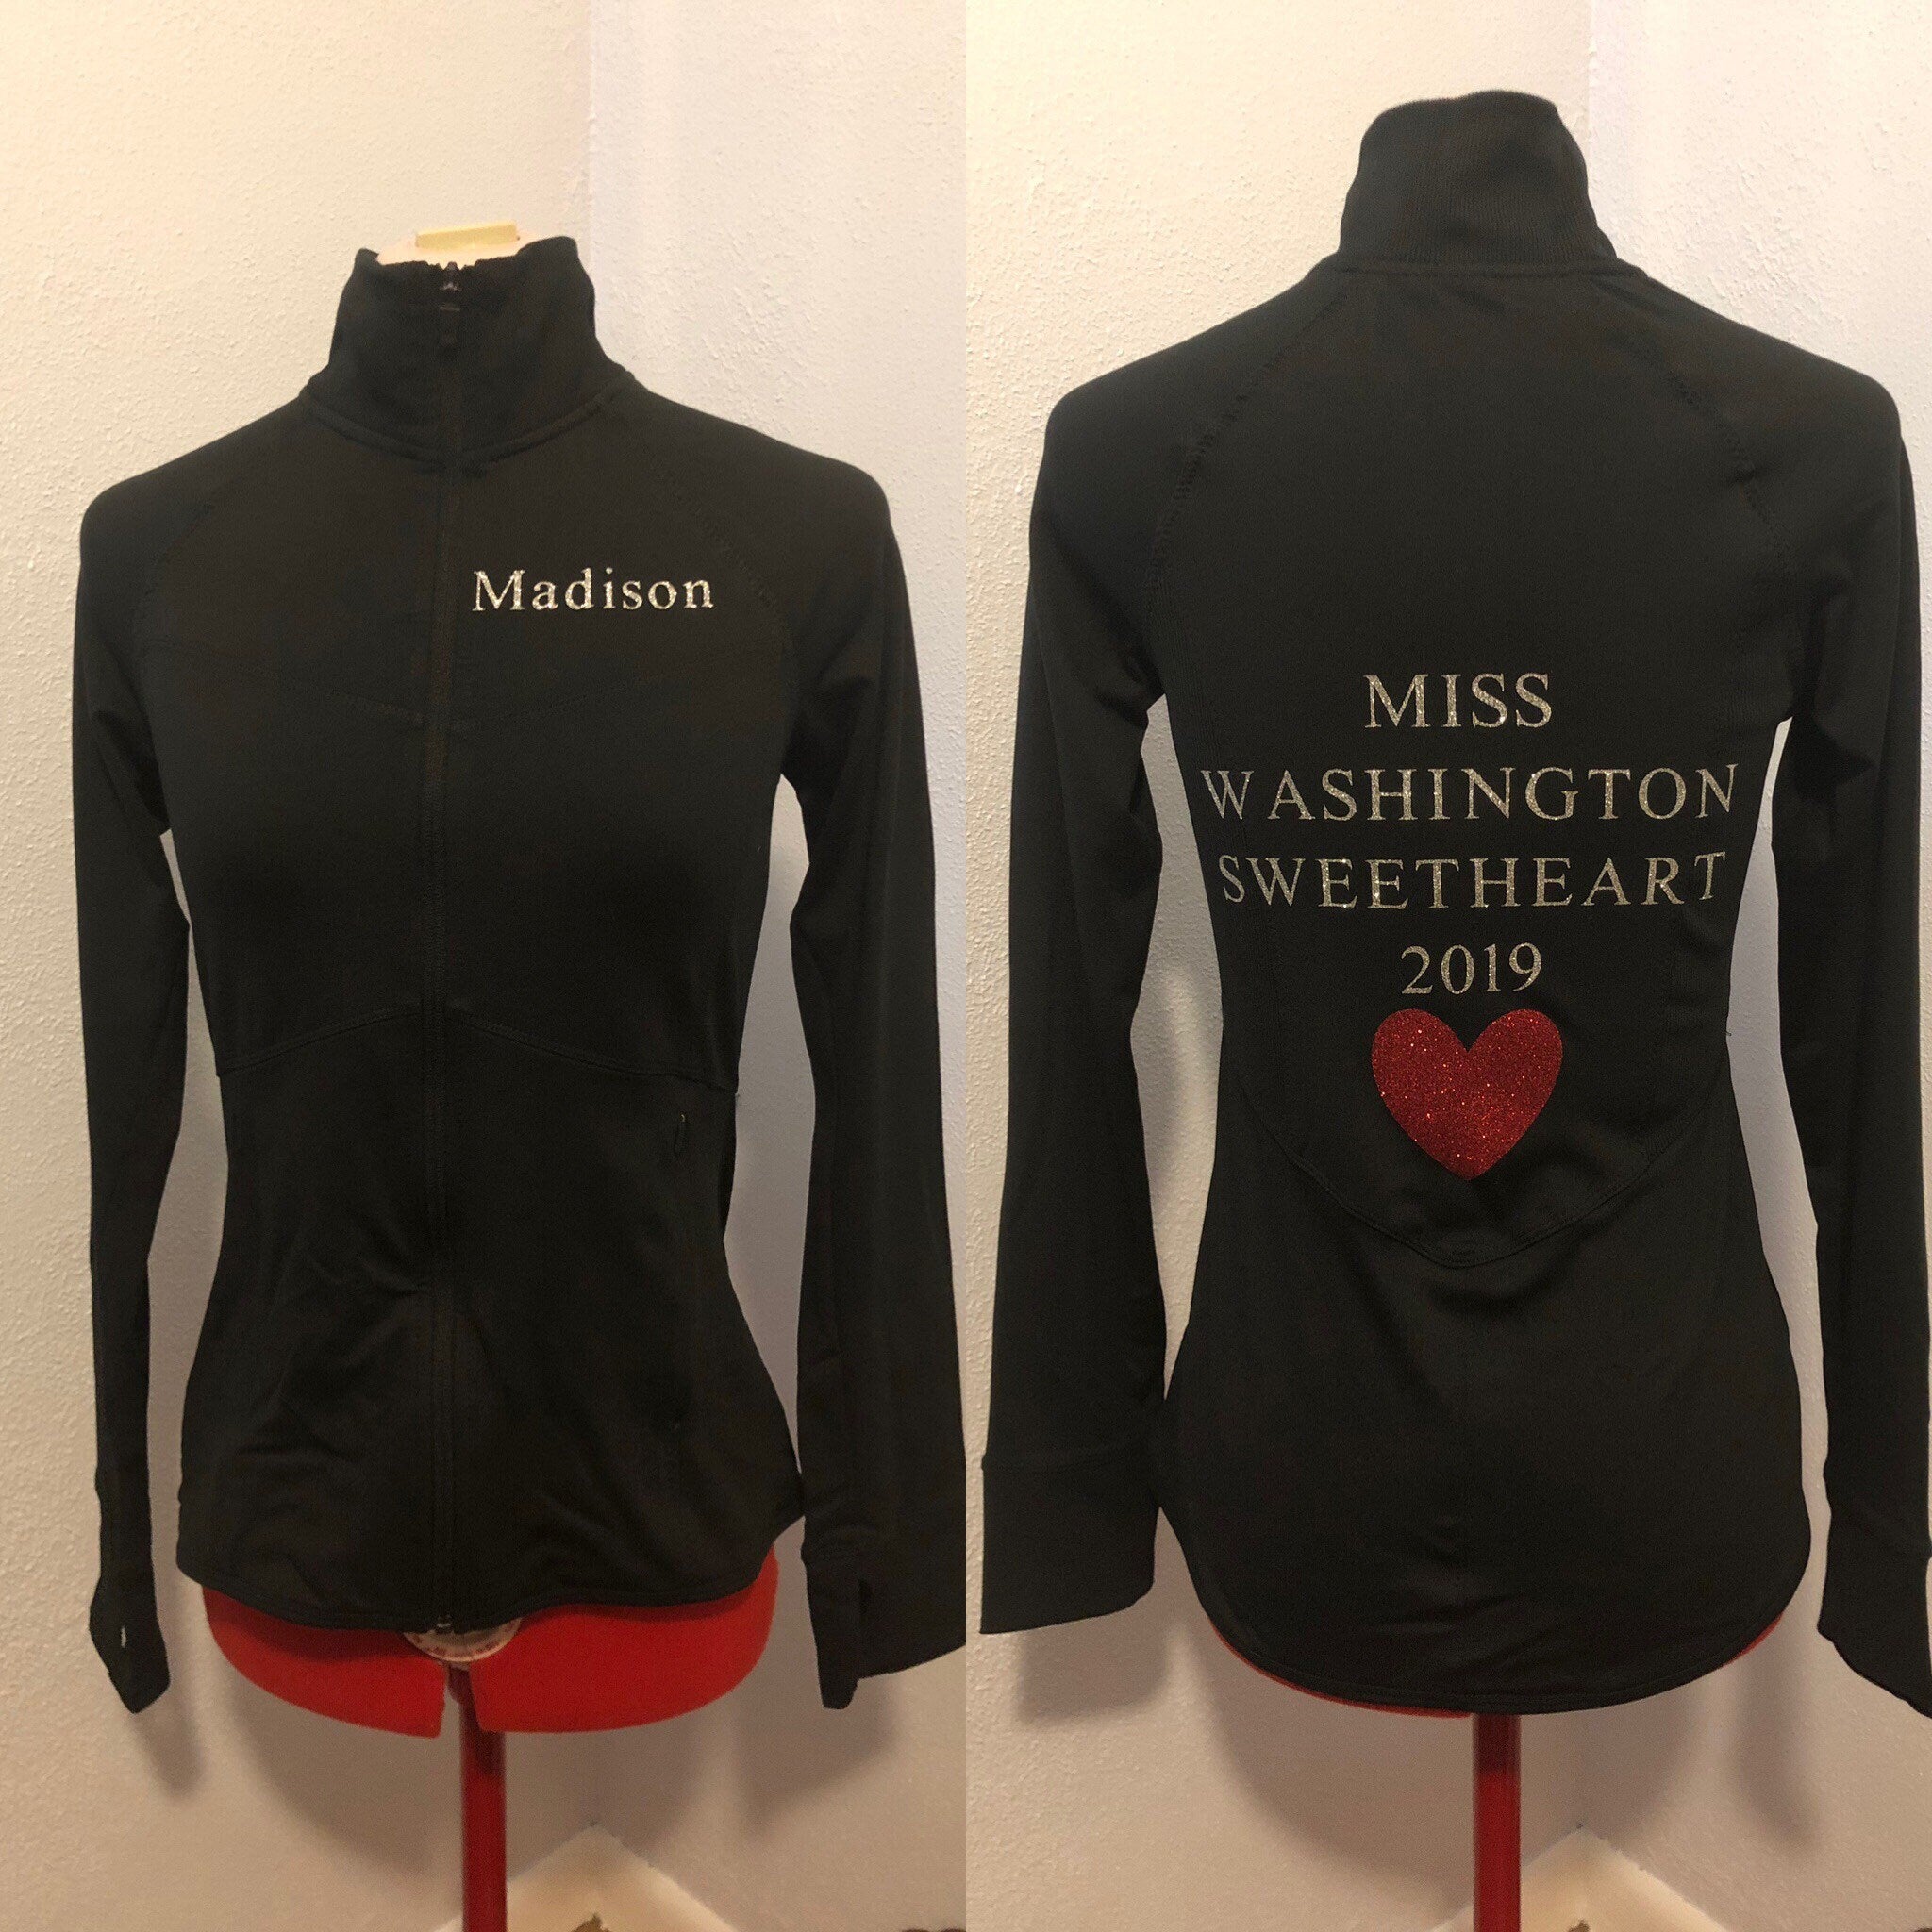 Miss National Sweetheart Title Jackets